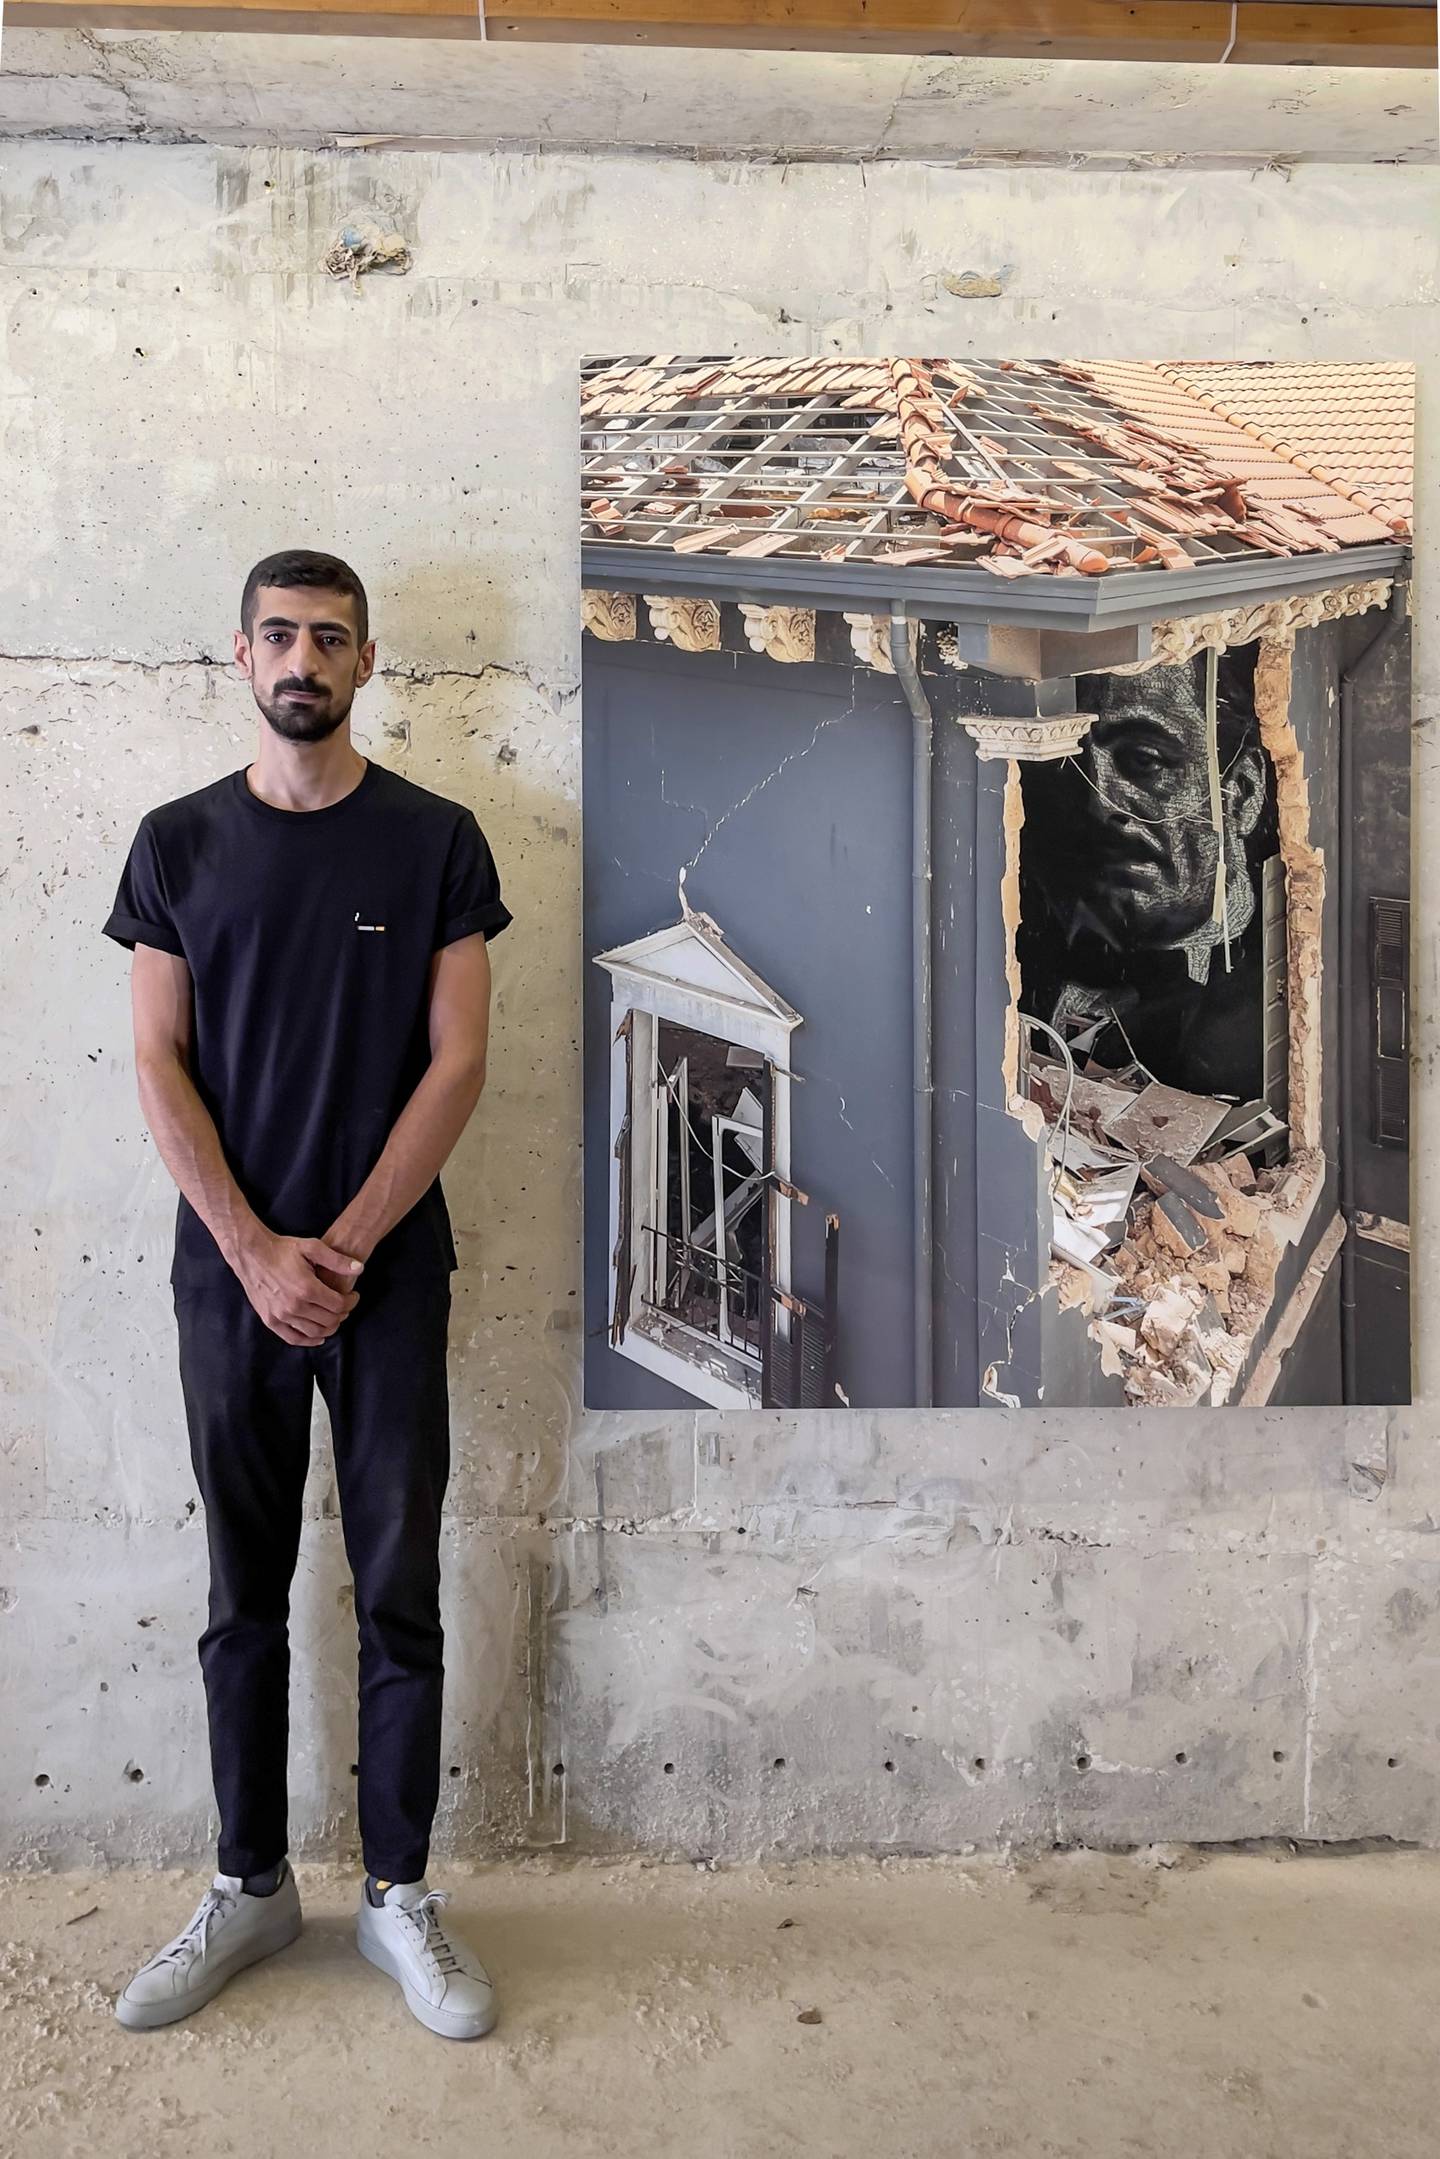 Photographer Dia Mrad next to his image of a mural of Khalil Gibran that was peeking out of a battered house. Courtesy of the artist